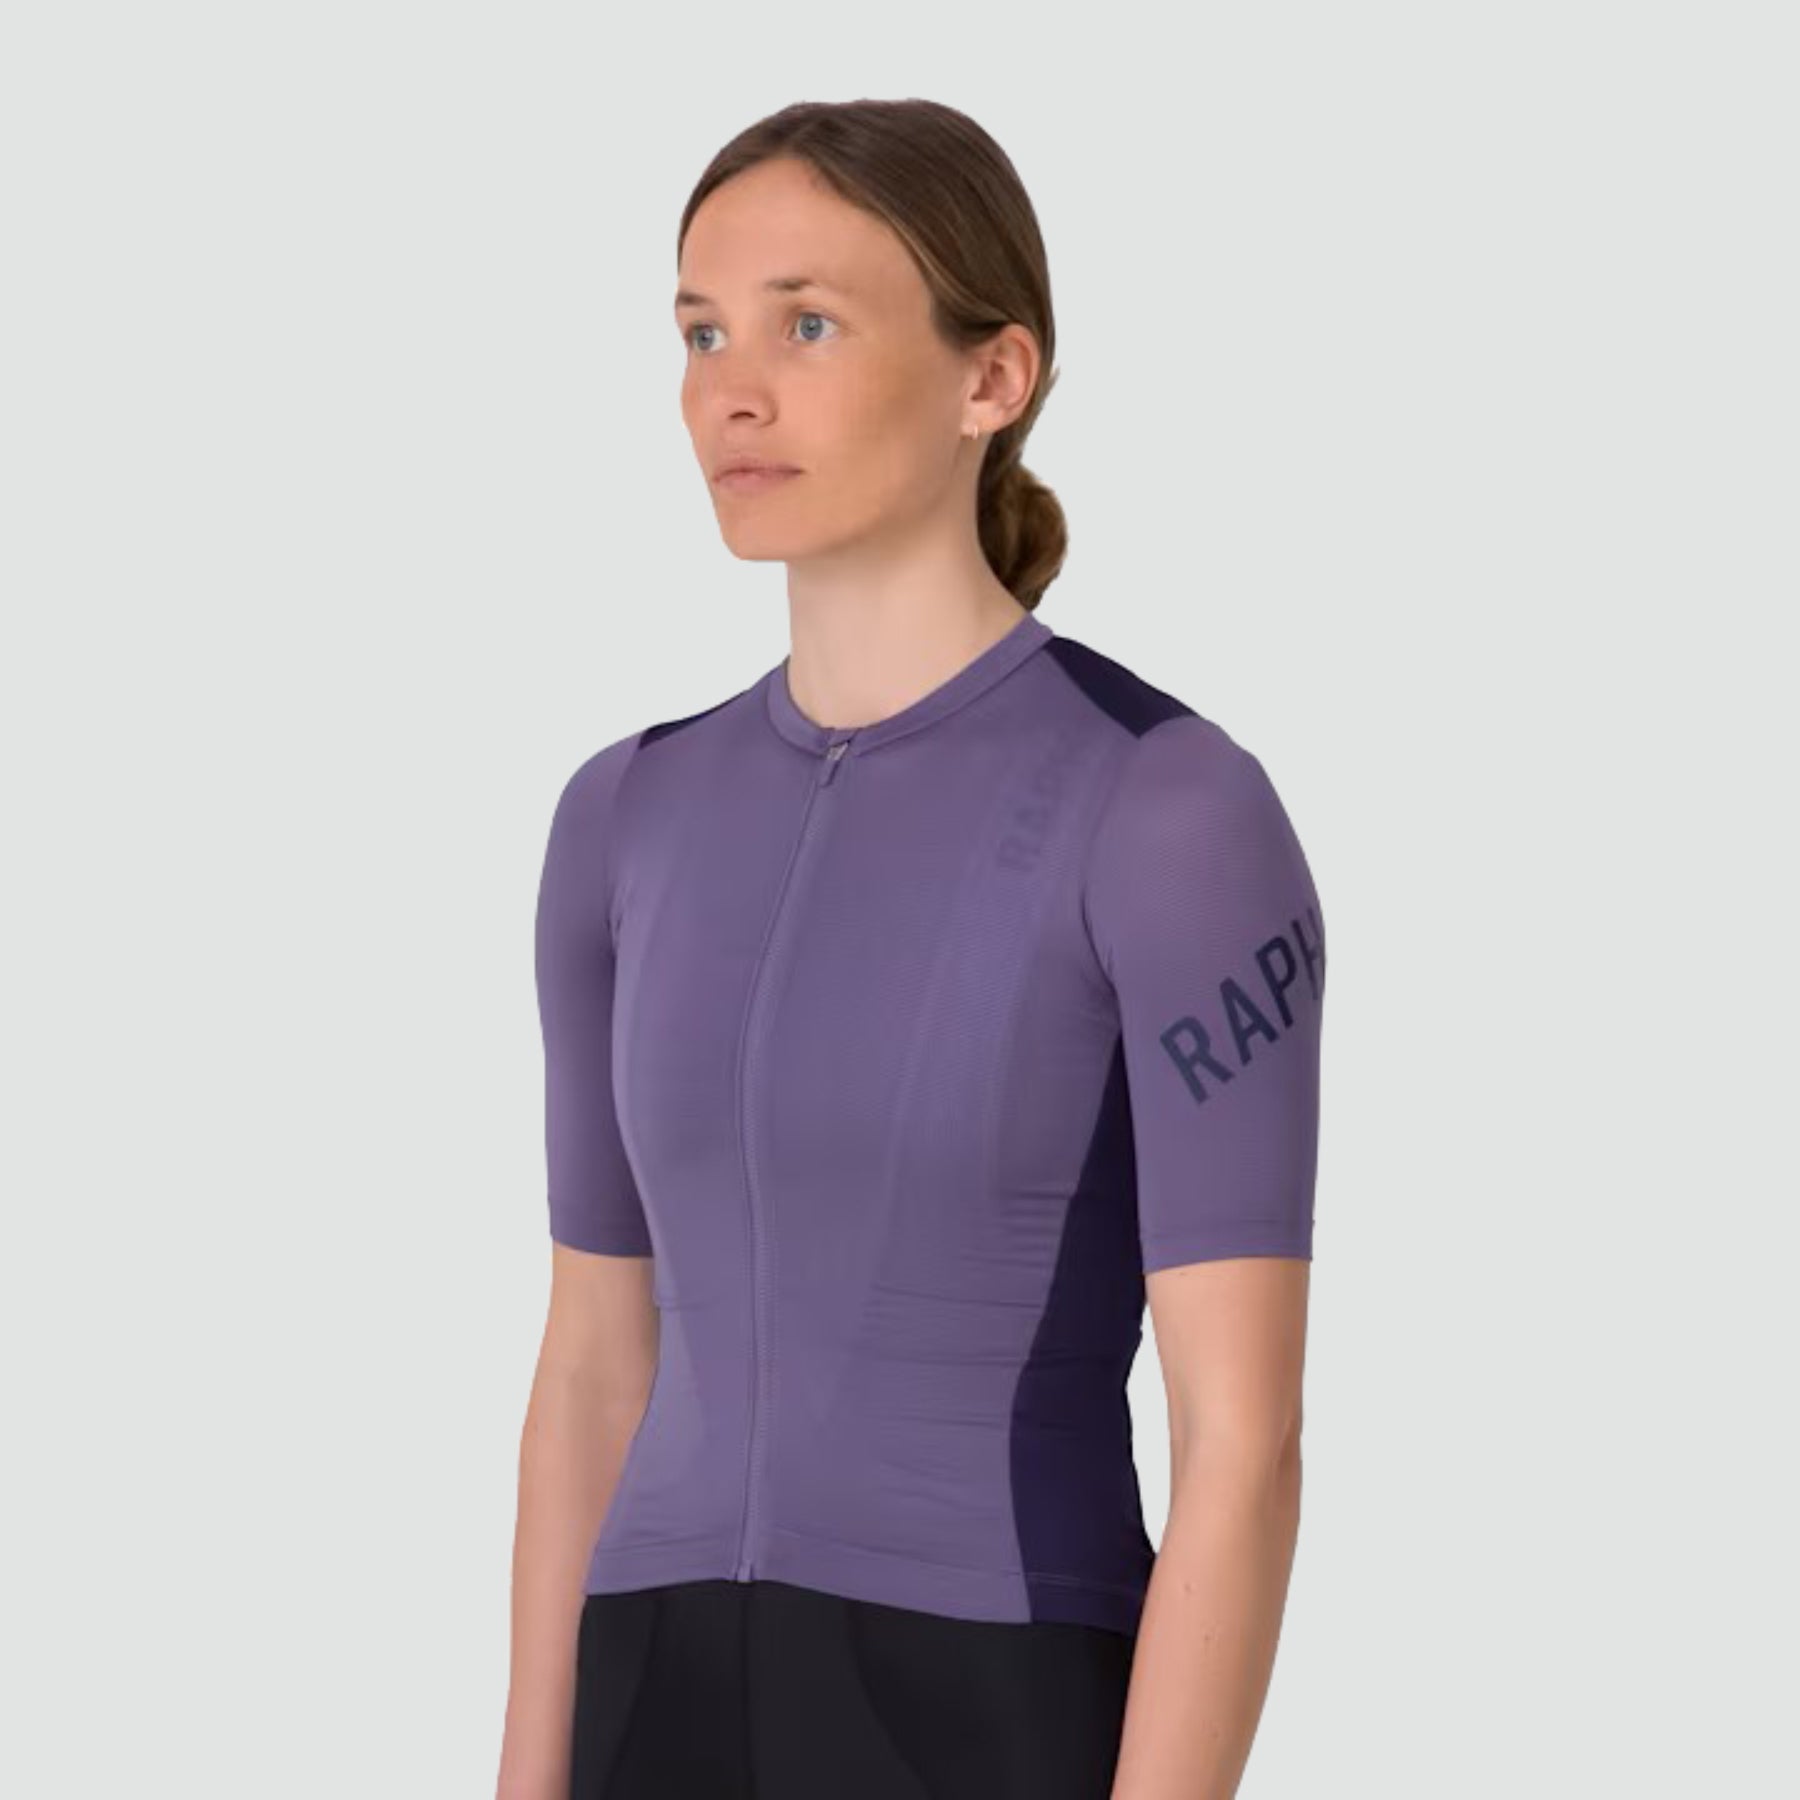 Maillot Pro Team Training Femme - Dusted Lilac/Navy Purple